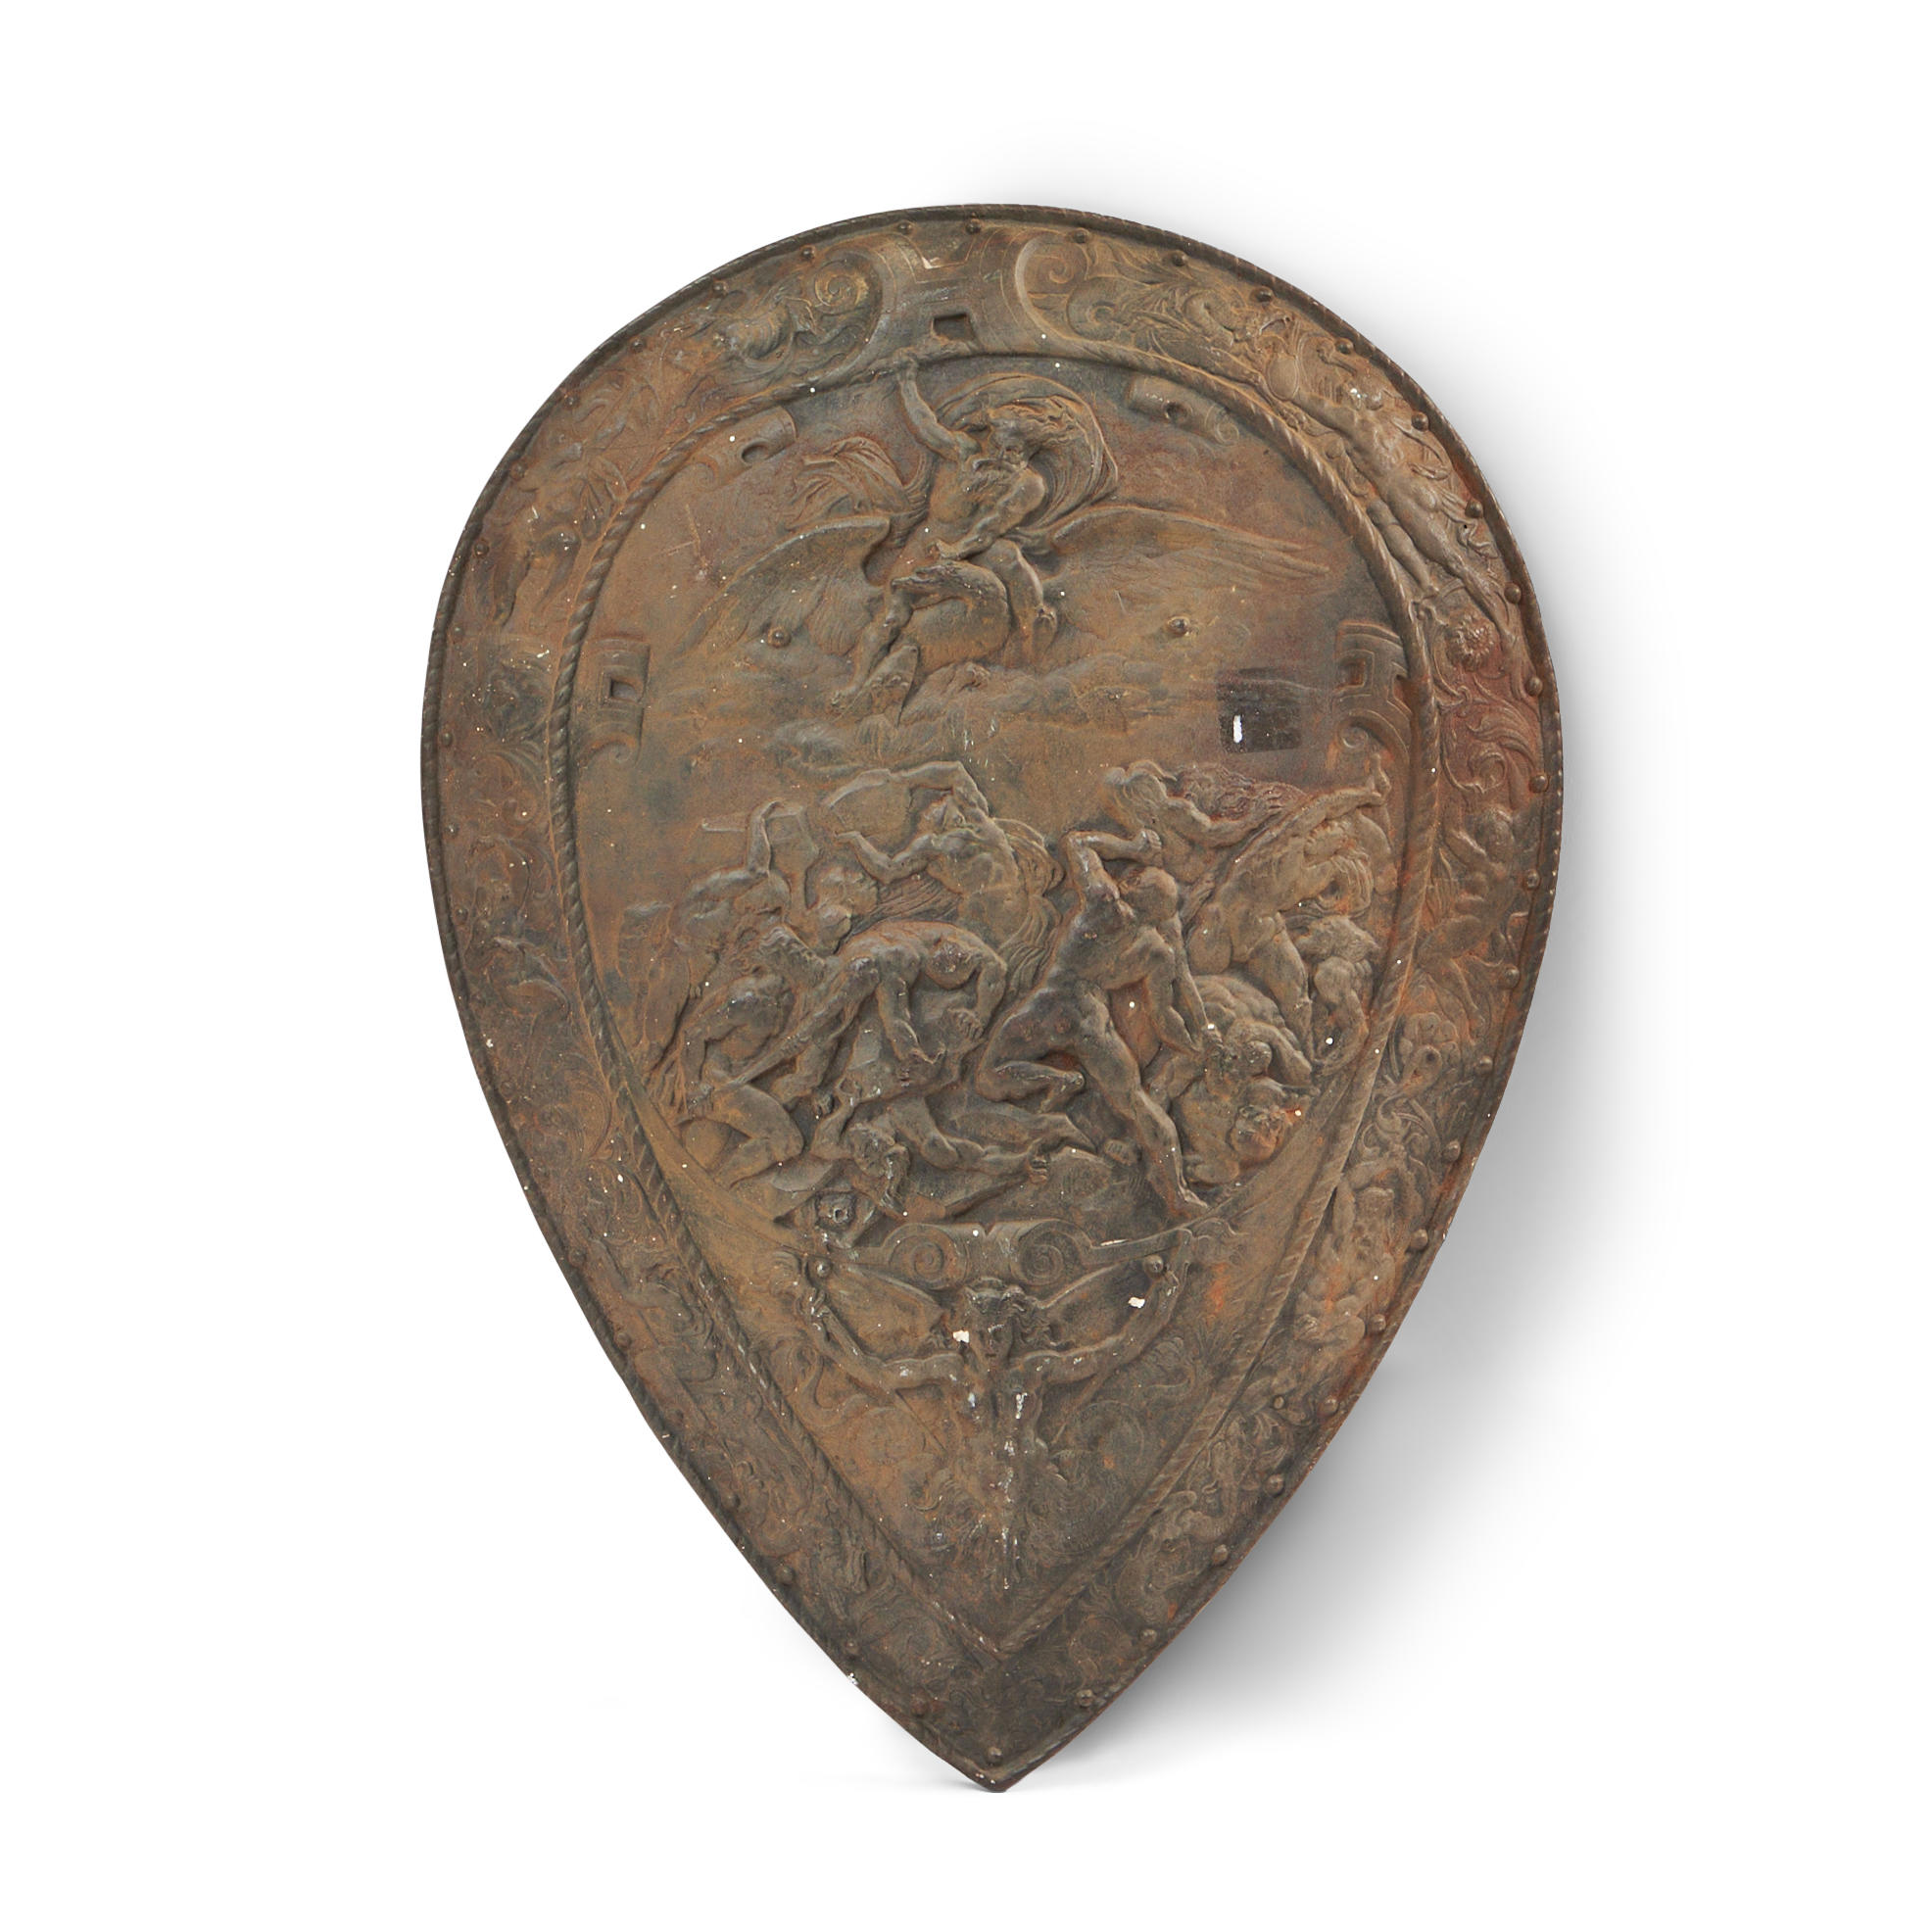 IRON SHIELD DEPICTING JUDGMENT 3aeaf3